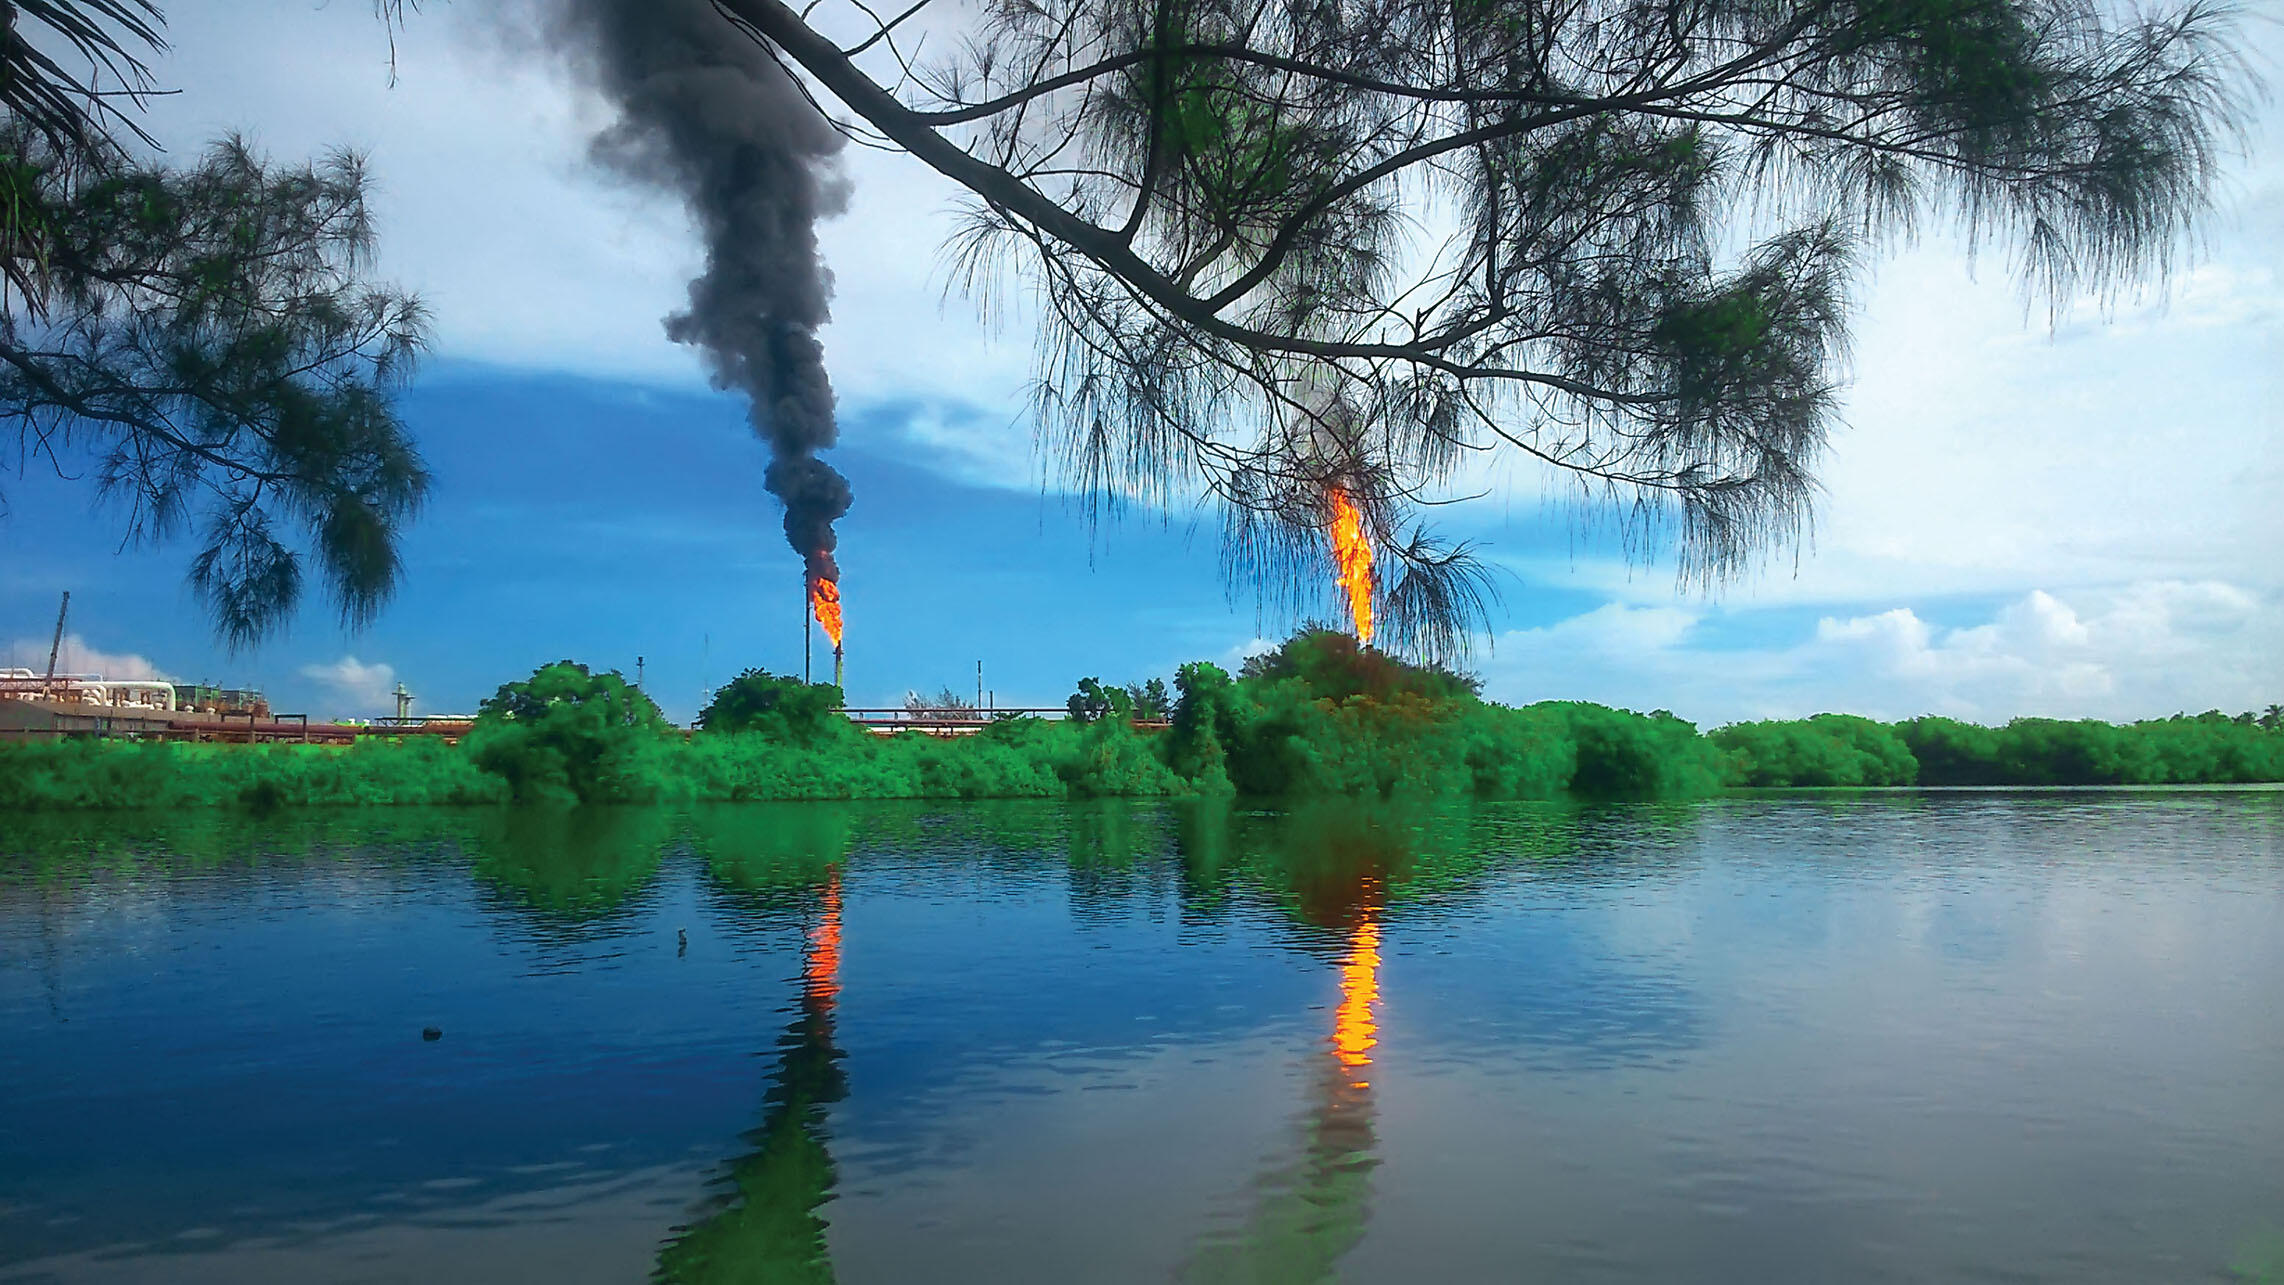 The refinery at Dos Bocas, Tabasco, Mexico, is slated to undergo a massive expansion. (Photo by Emmanuel Santos.)